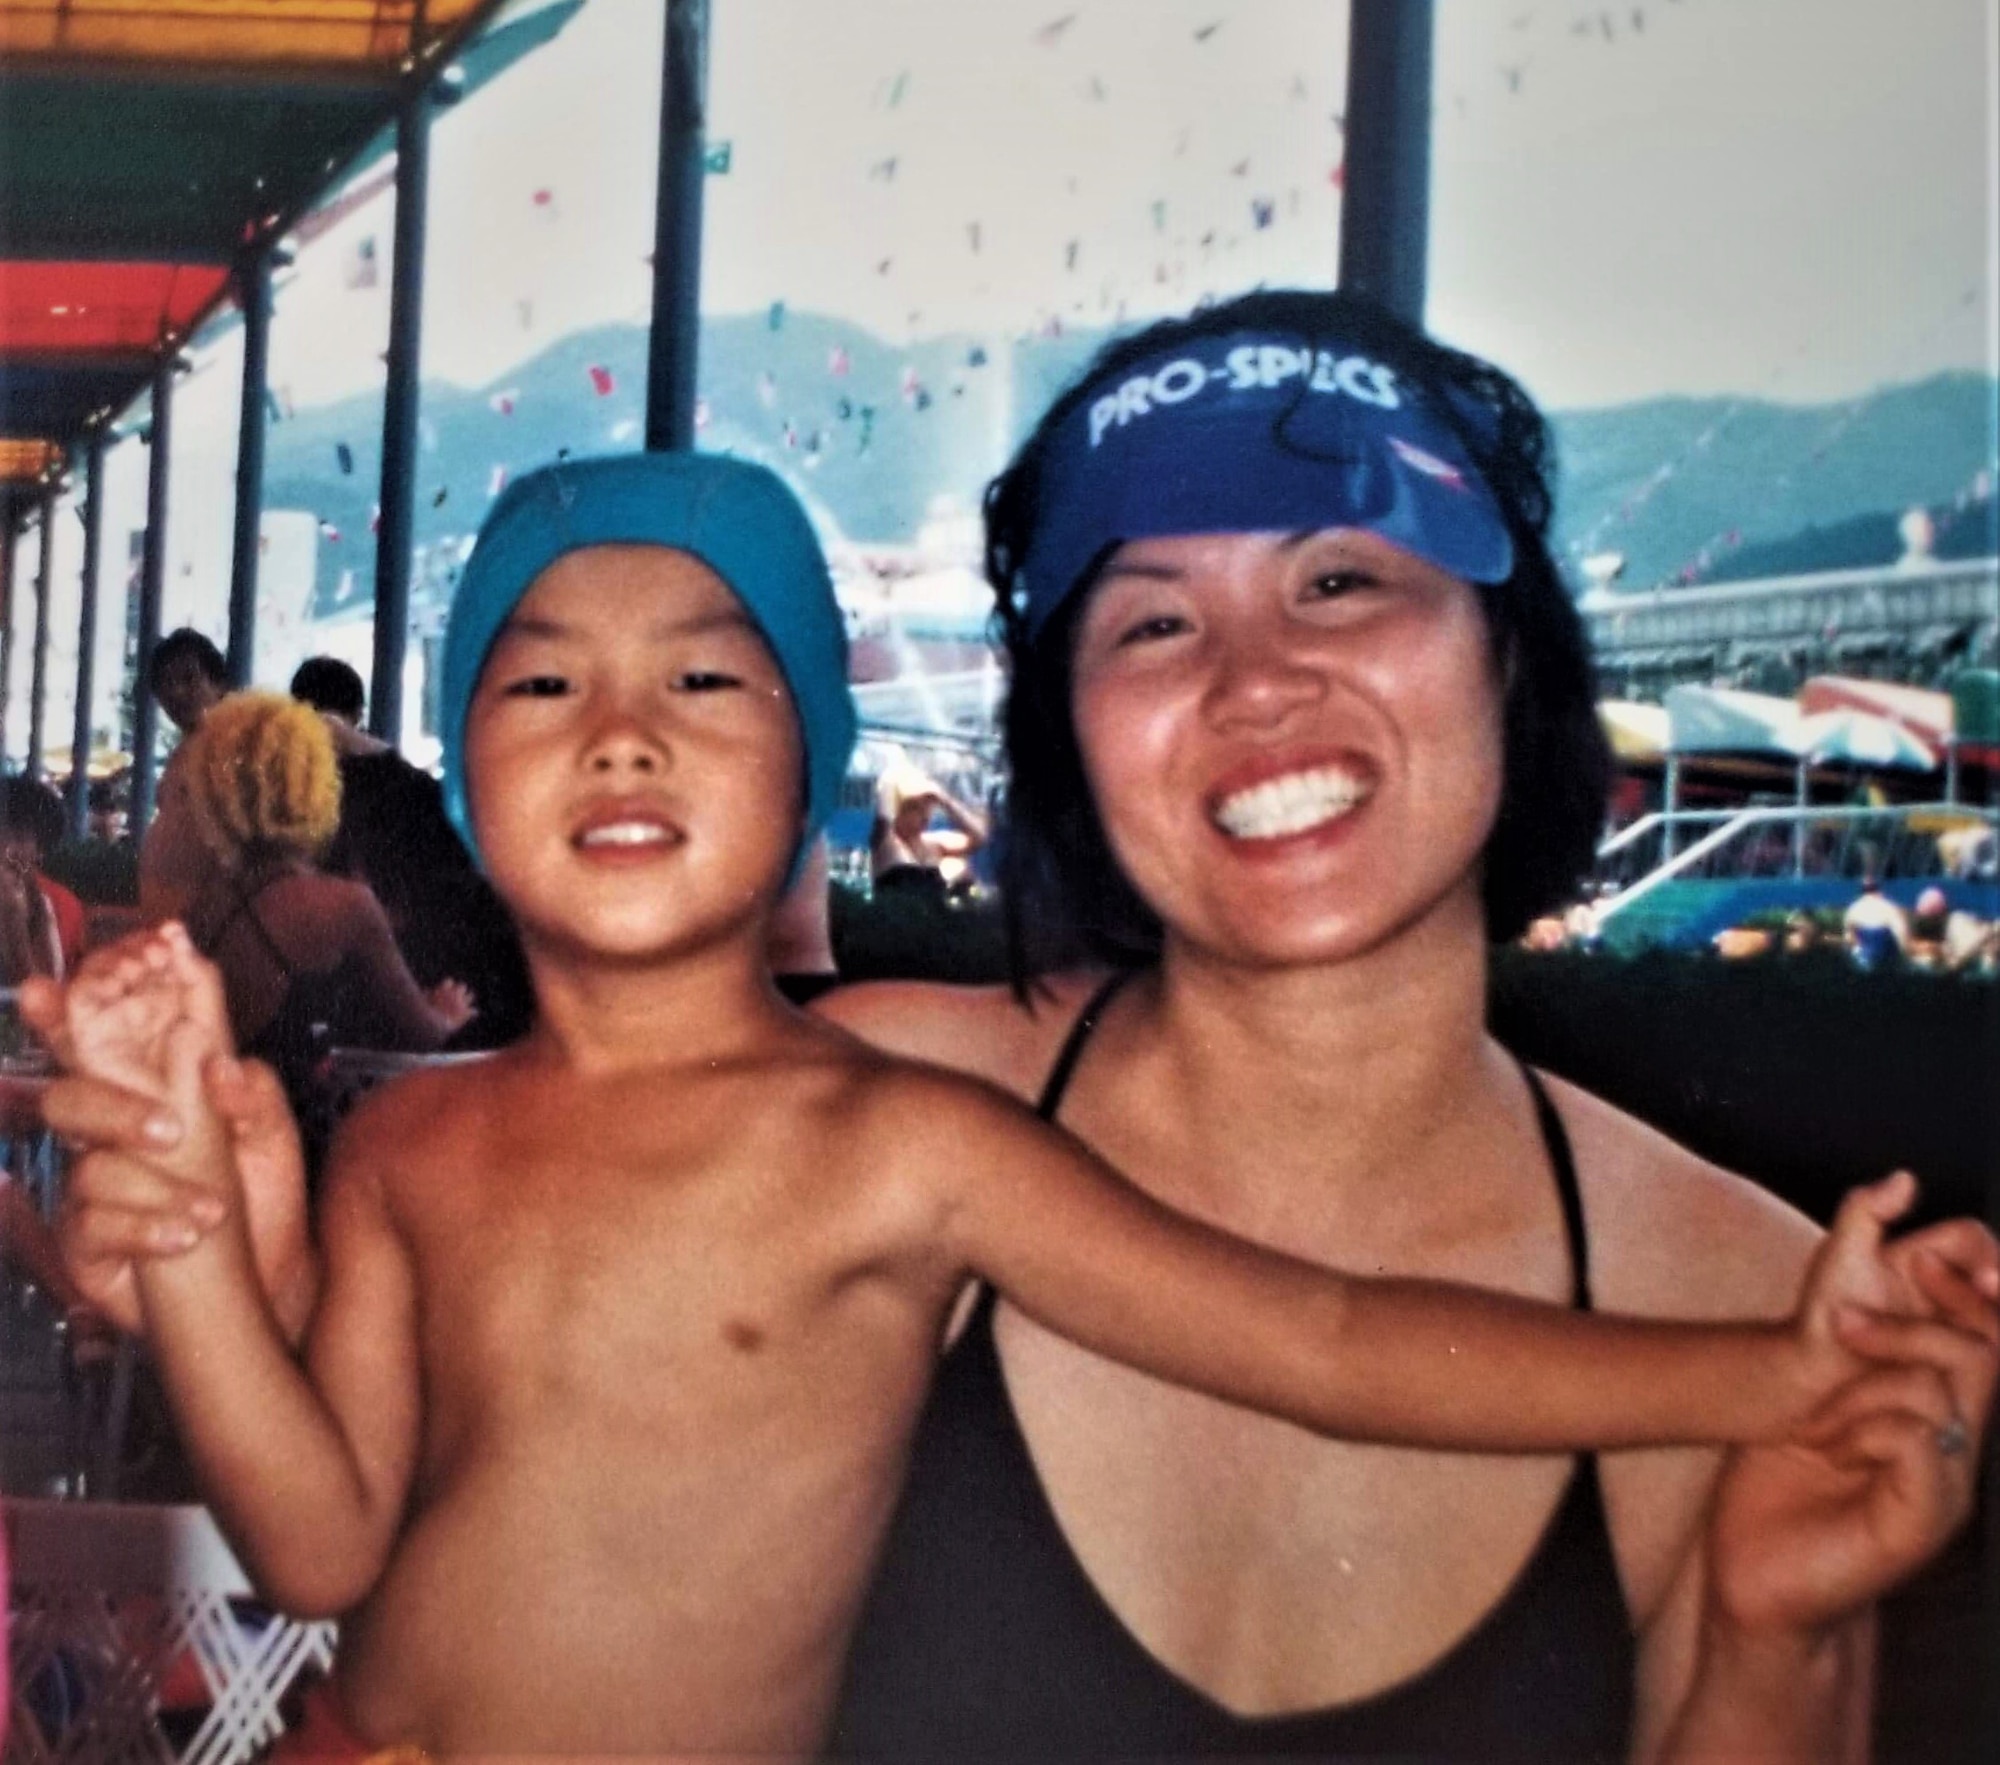 Maj. Jay Park, director of operations for Air Force Recruiting Service’s Detachment 1, spending time with his mother at a public pool in South Korea in 1988.